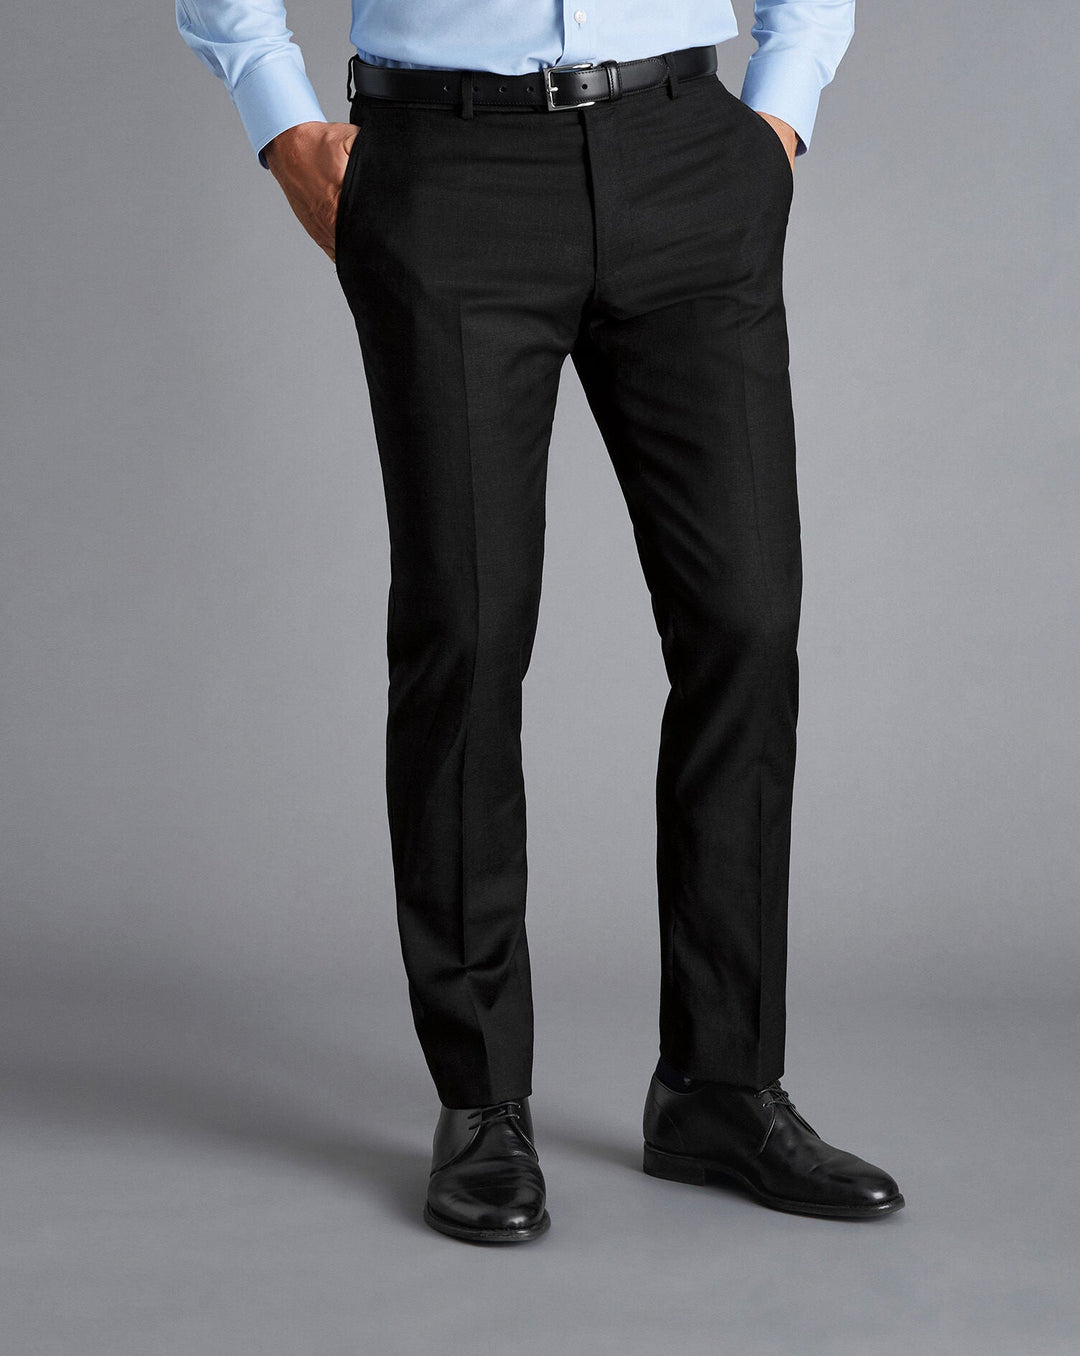 Charles Tyrwhitt Black Slim Fit Natural Stretch Twill Suit Trouser